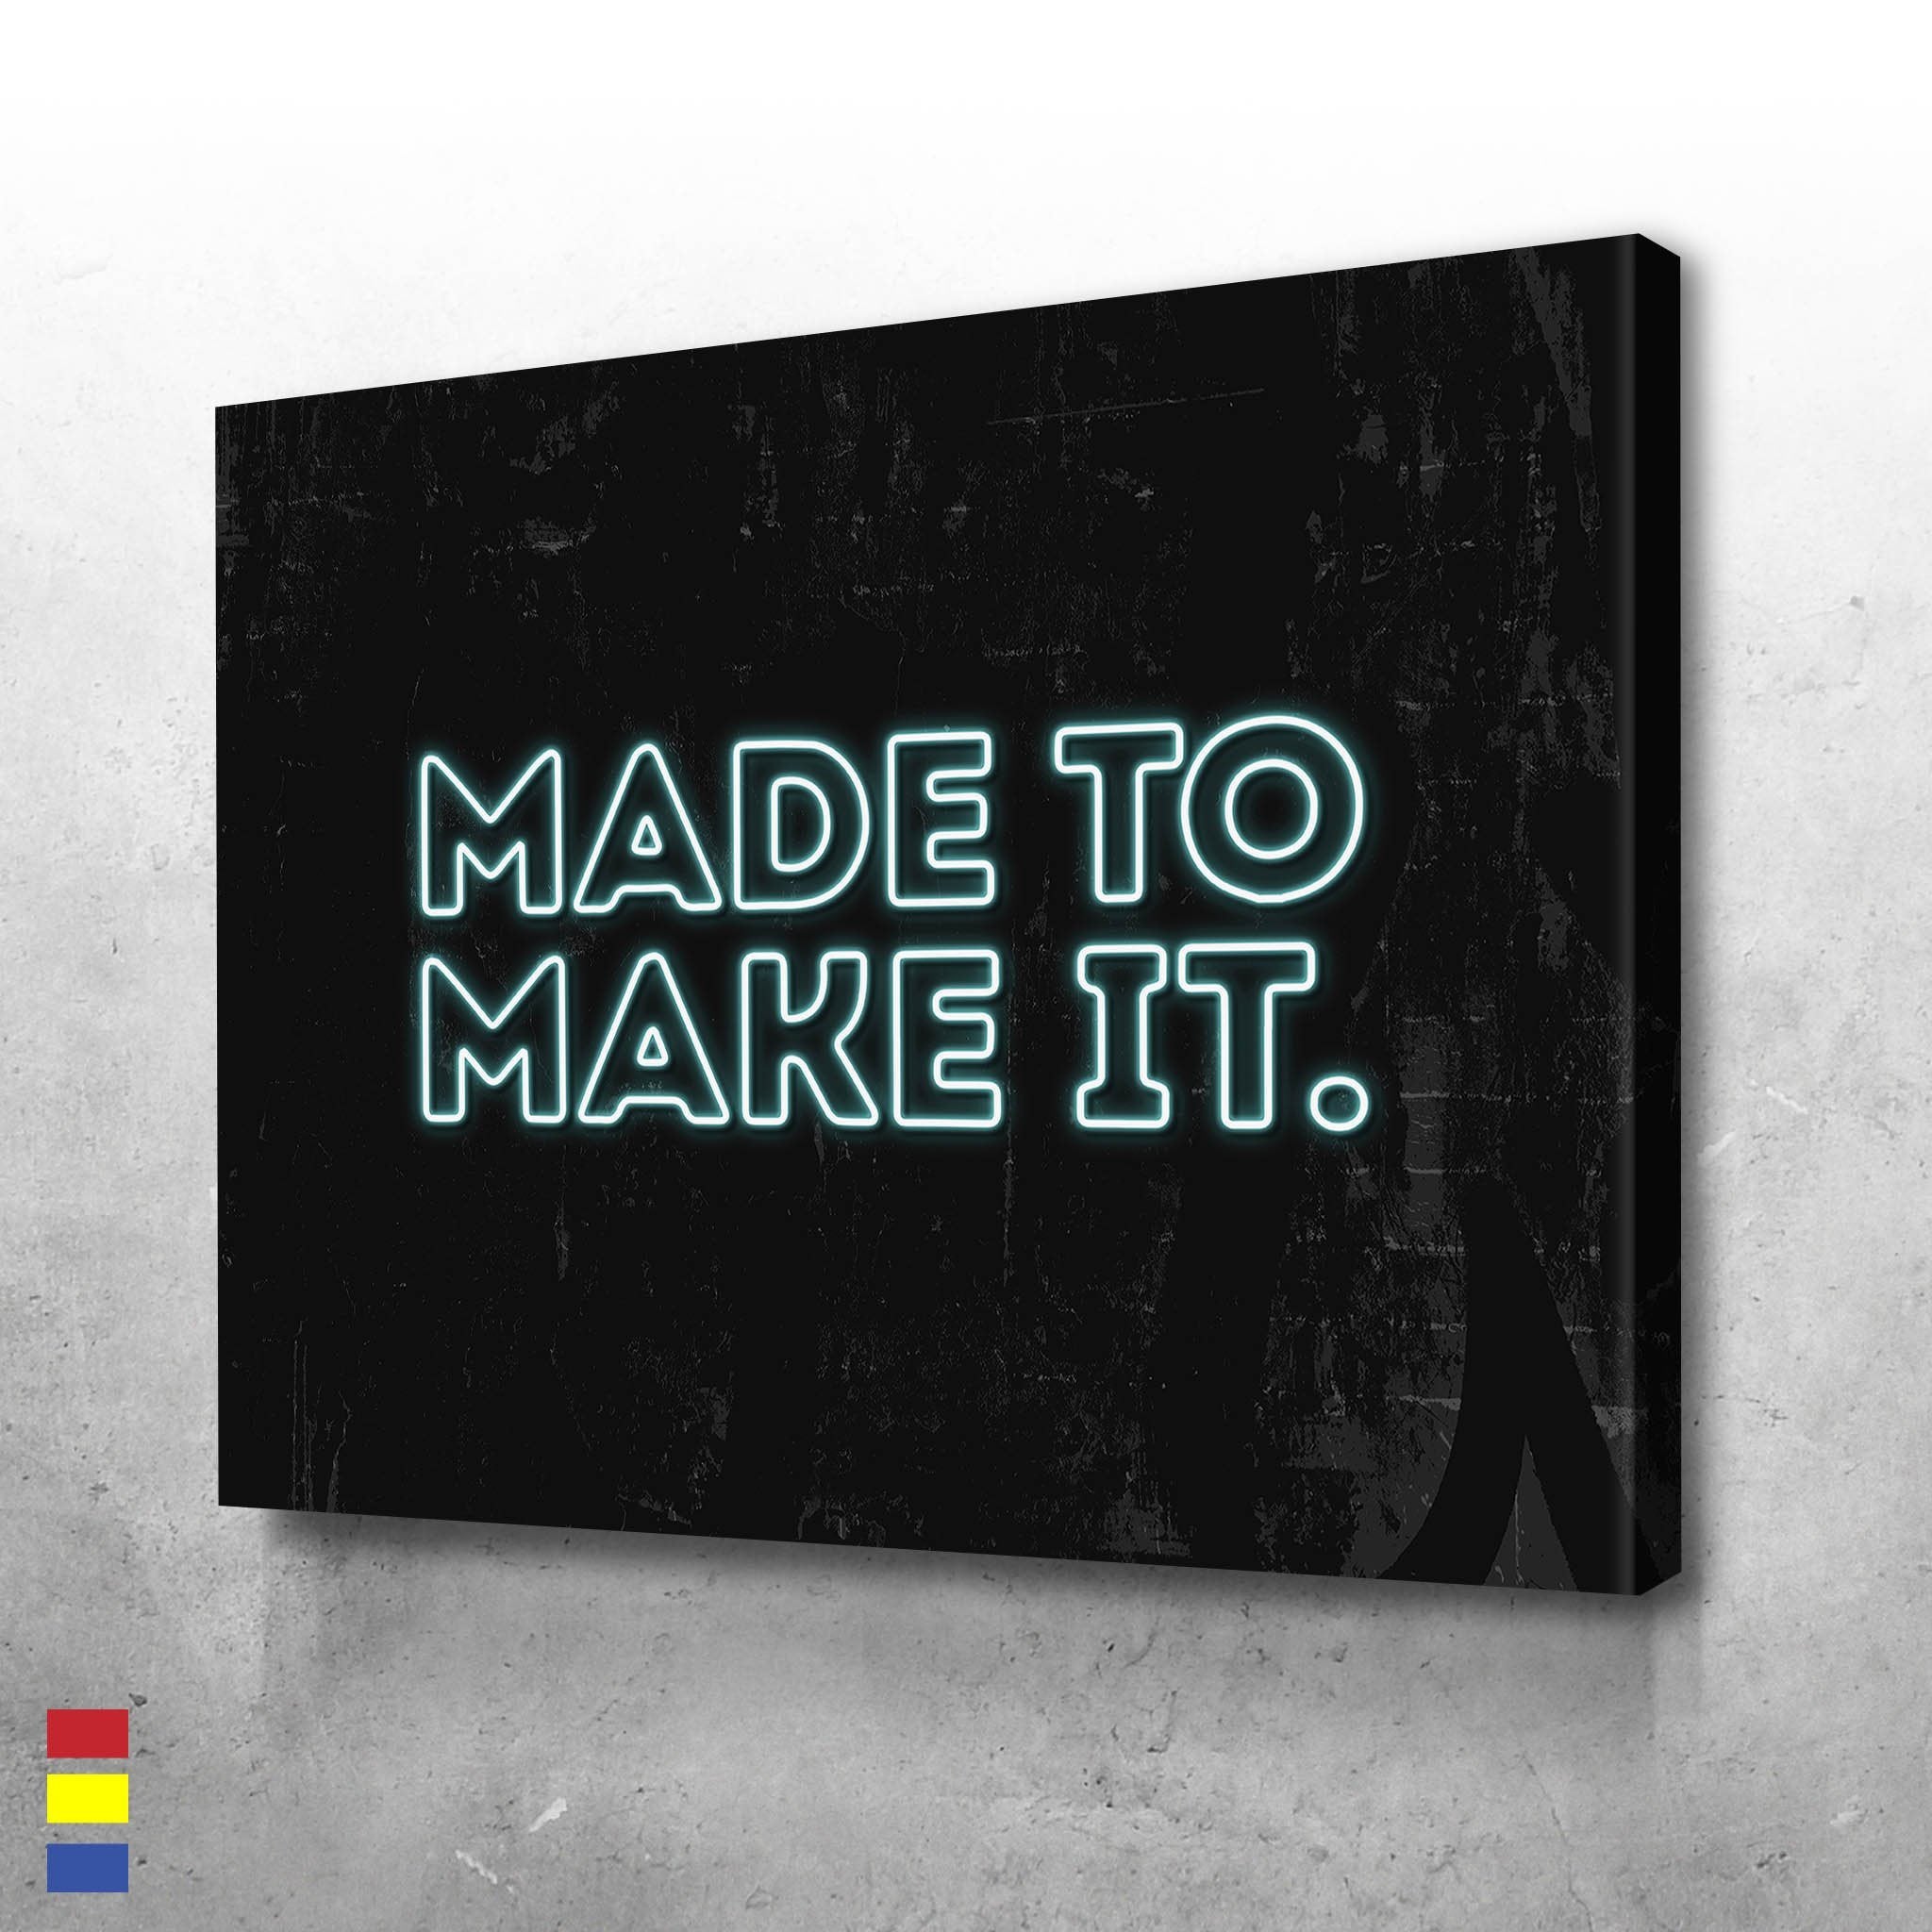 Made to Make it